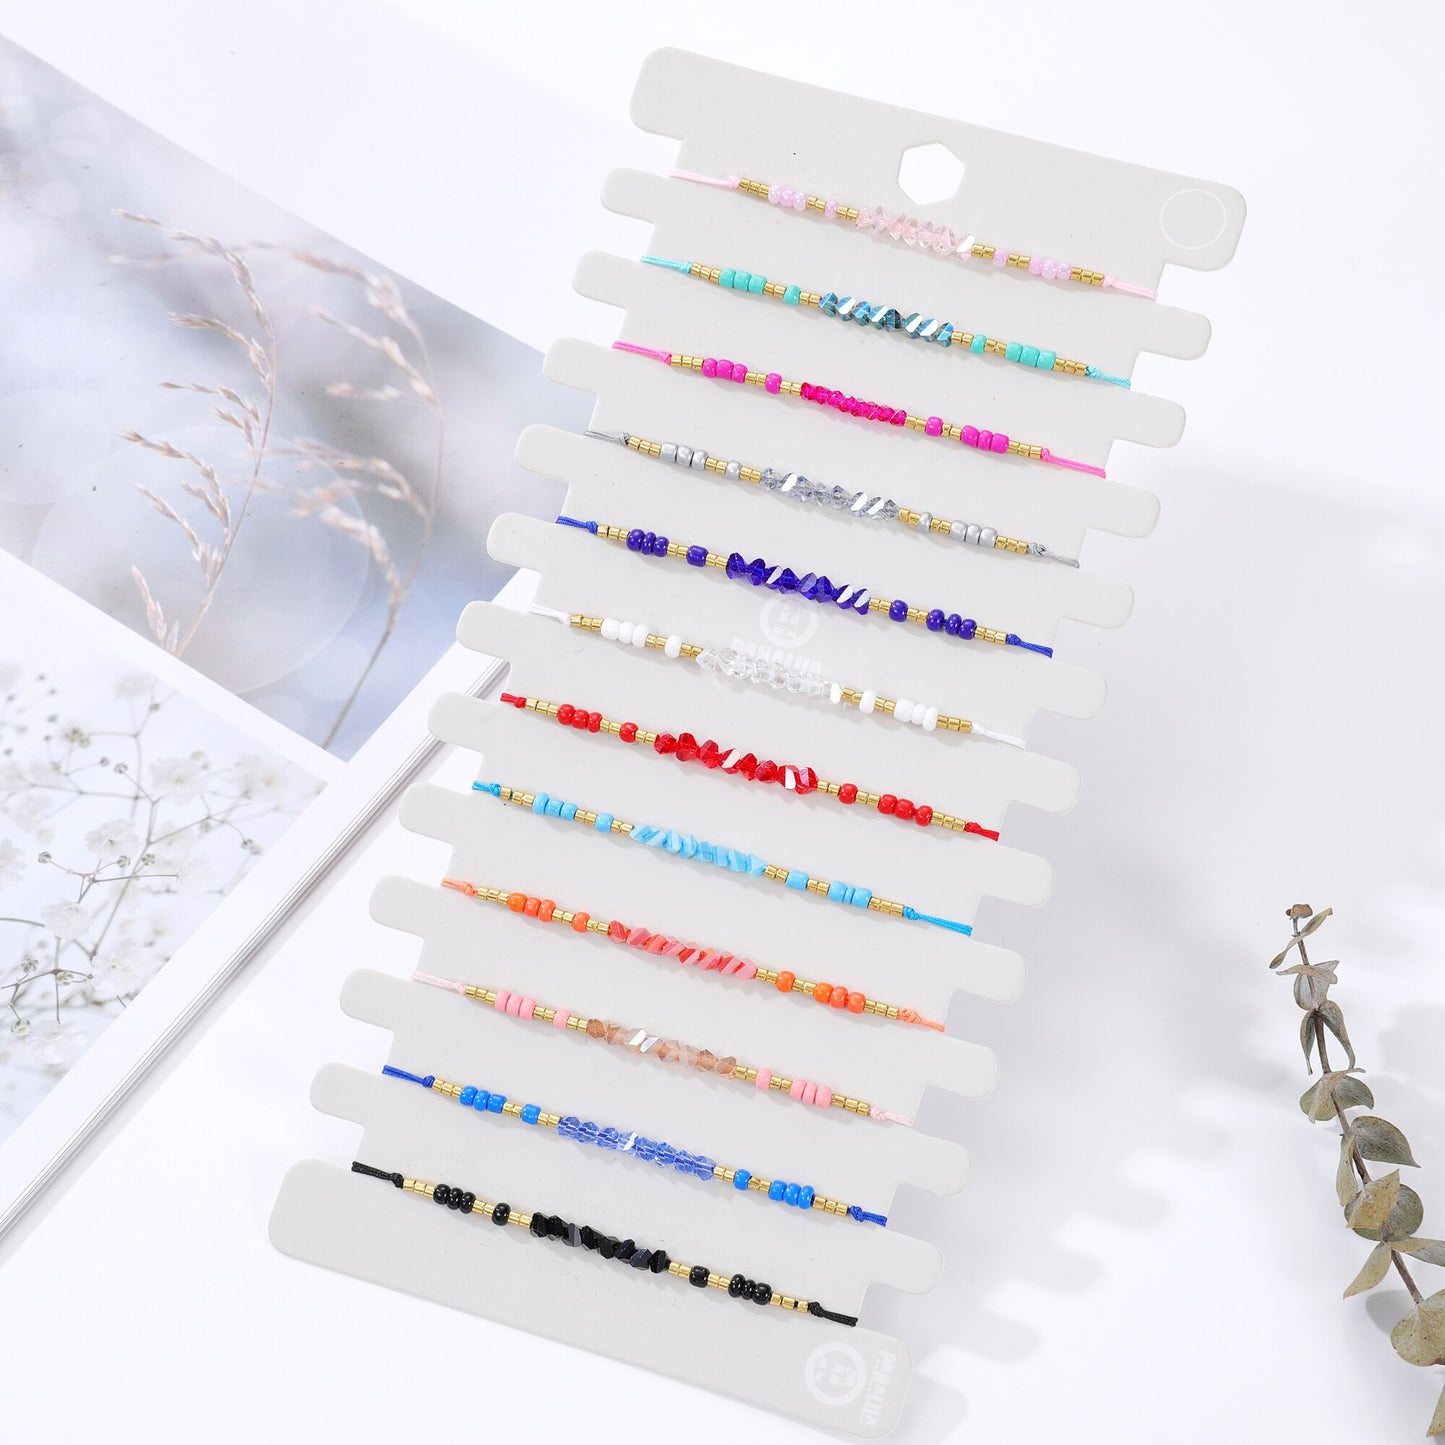 12Pcs Seeds Beads Faceted Crystal Braceles Anklets Adjustable Hand Braided Wax Rope Chain Wristband Cuff Jewelry